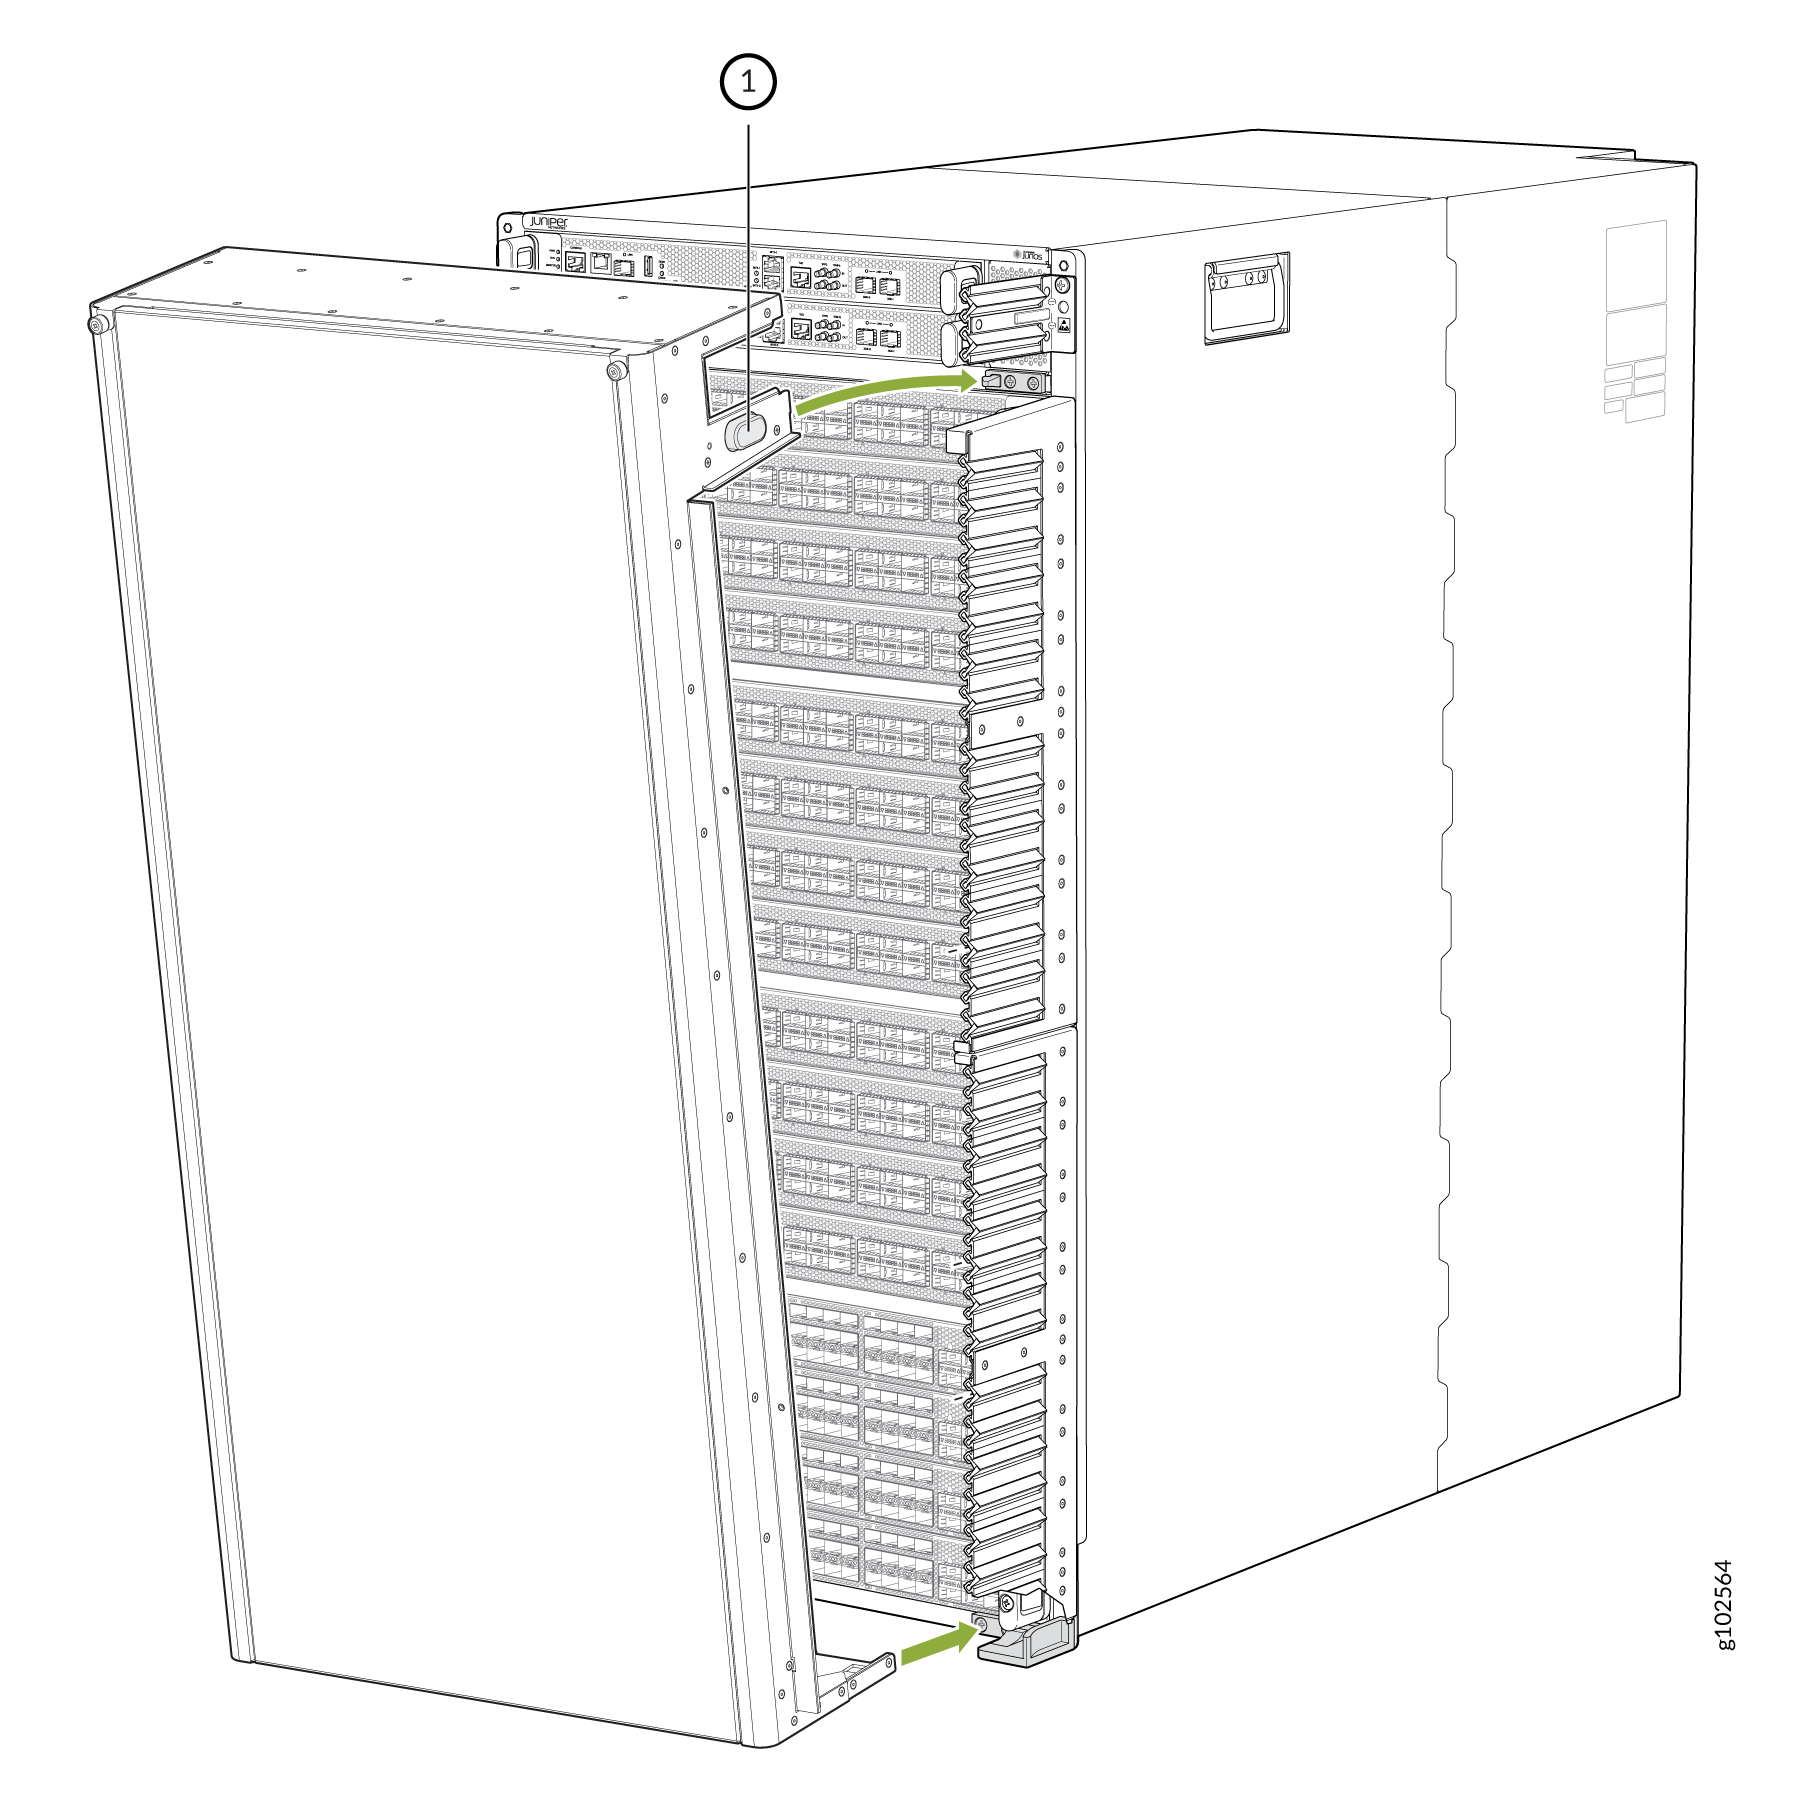 Install the JNP10016-FRPNL1 Front Door on the PTX10016 Chassis